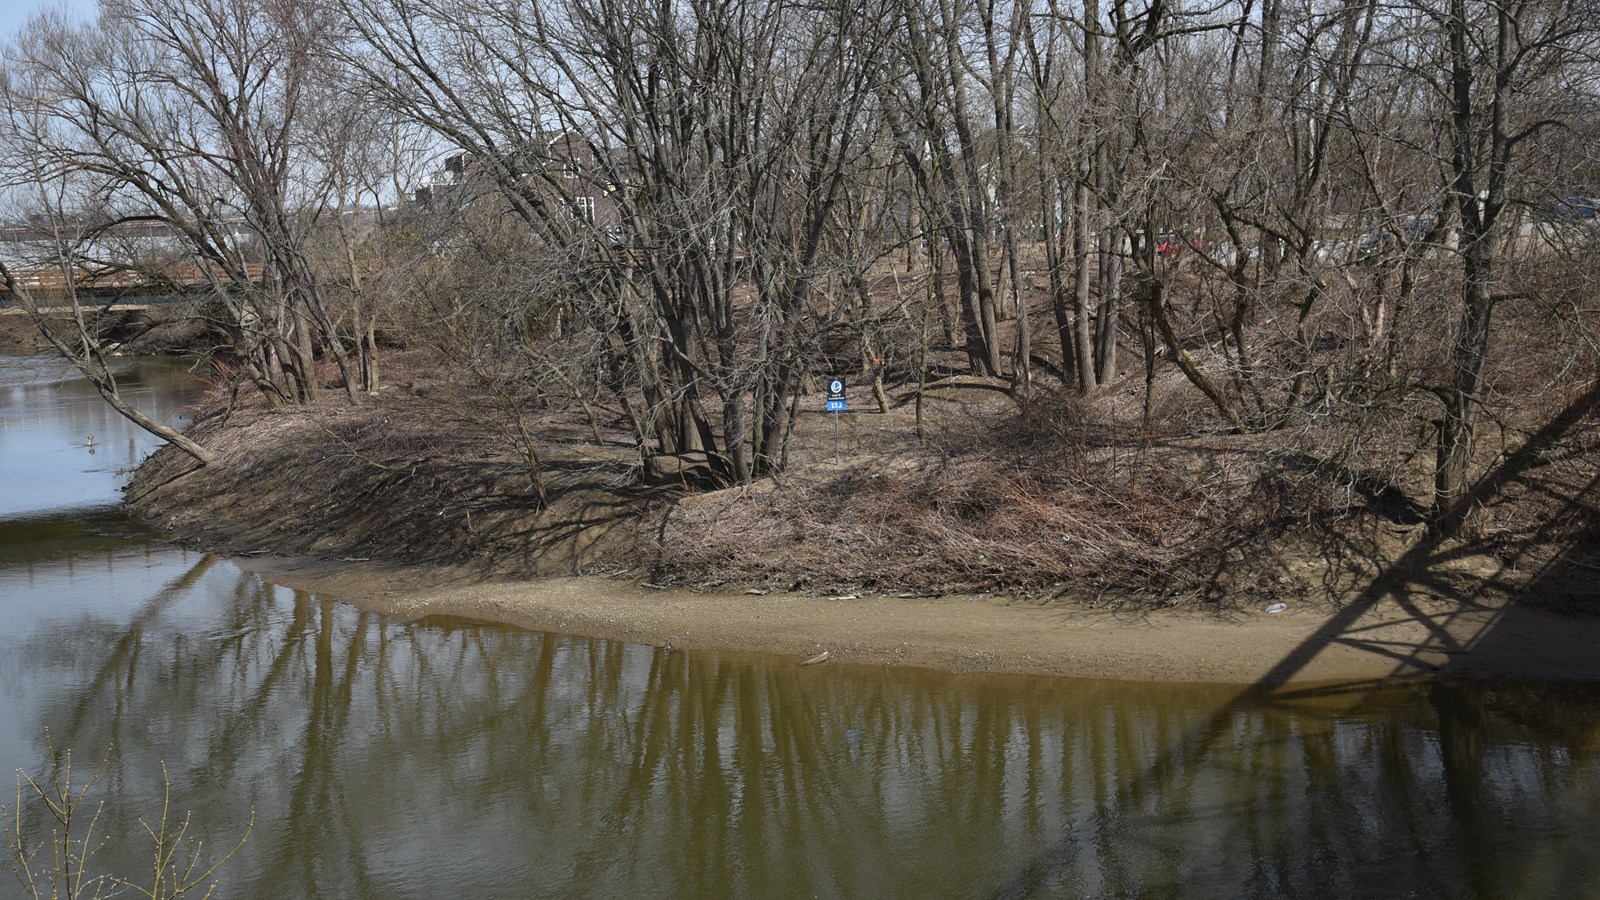 A lowered area along the Cuyahoga River used by paddlers to access the river.